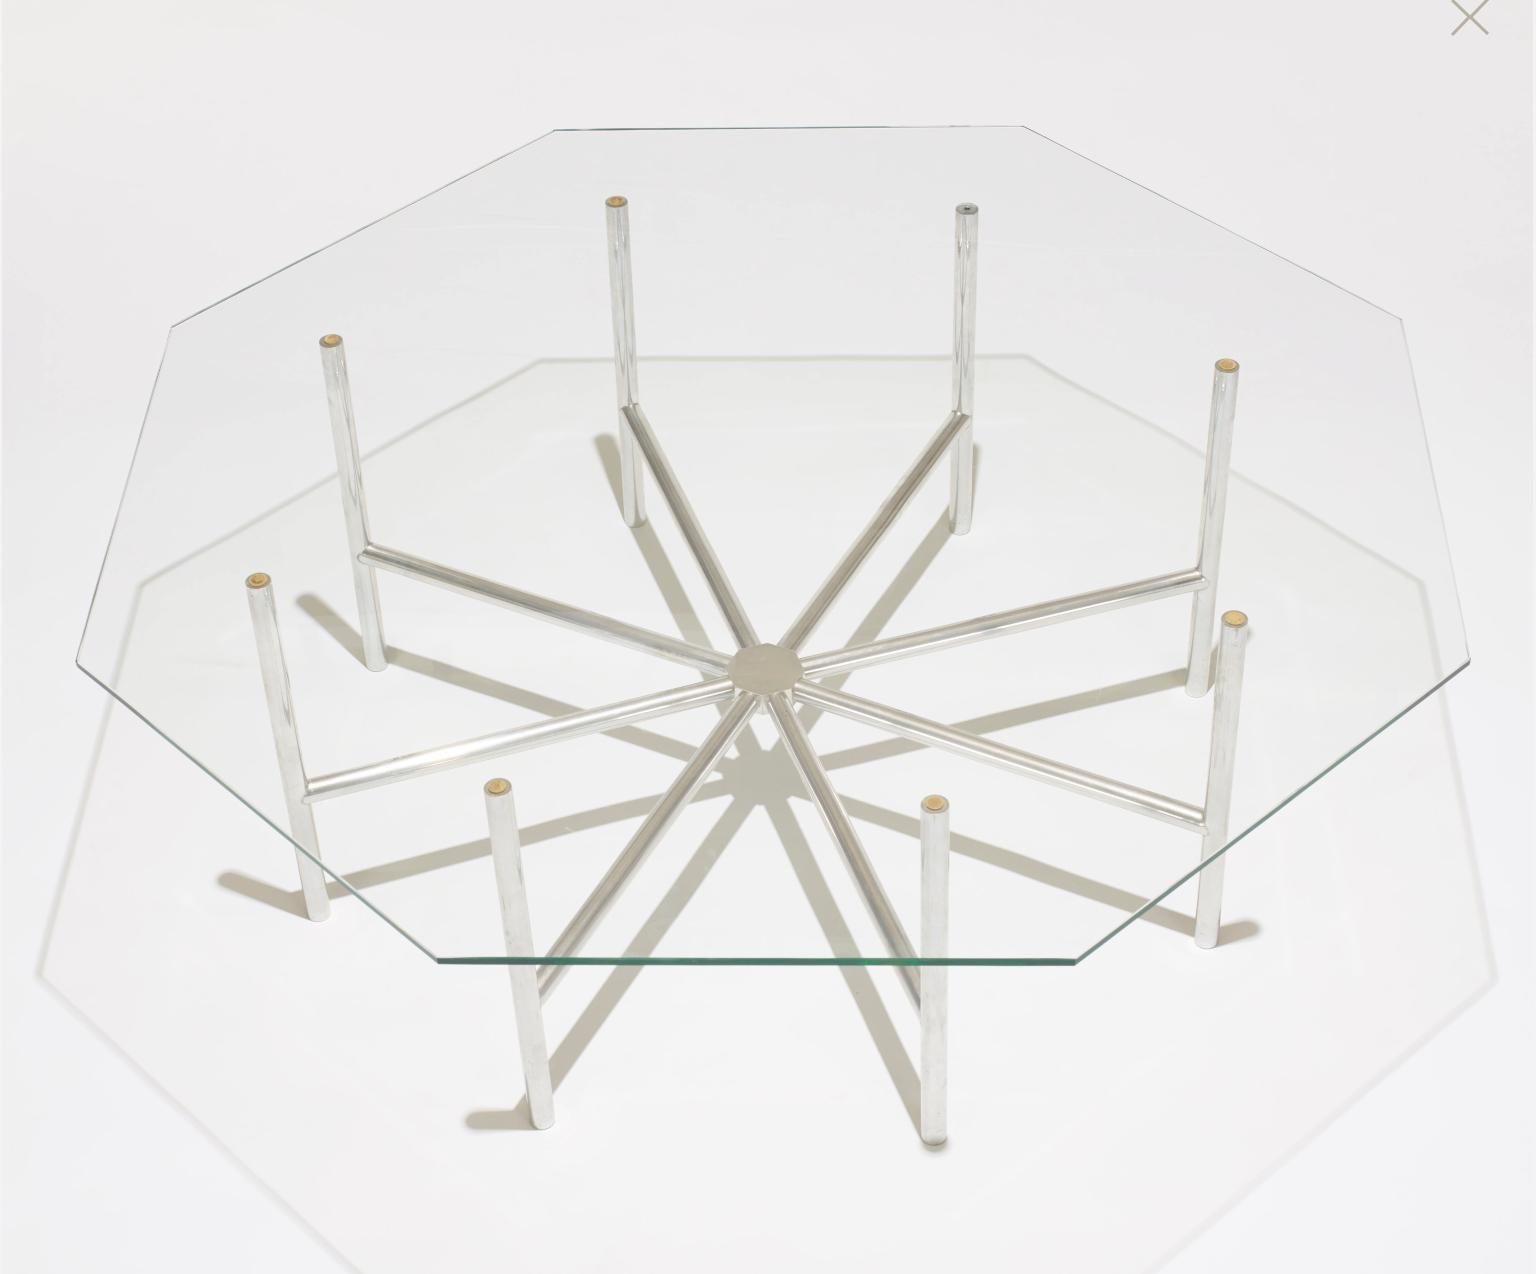 Rare cocktail table from John Vesey's famous 1958 collection. Polished aluminum spokes connecting to a central nut, with original octagonal glass top. Model V-59 in the John Vesey catalog.